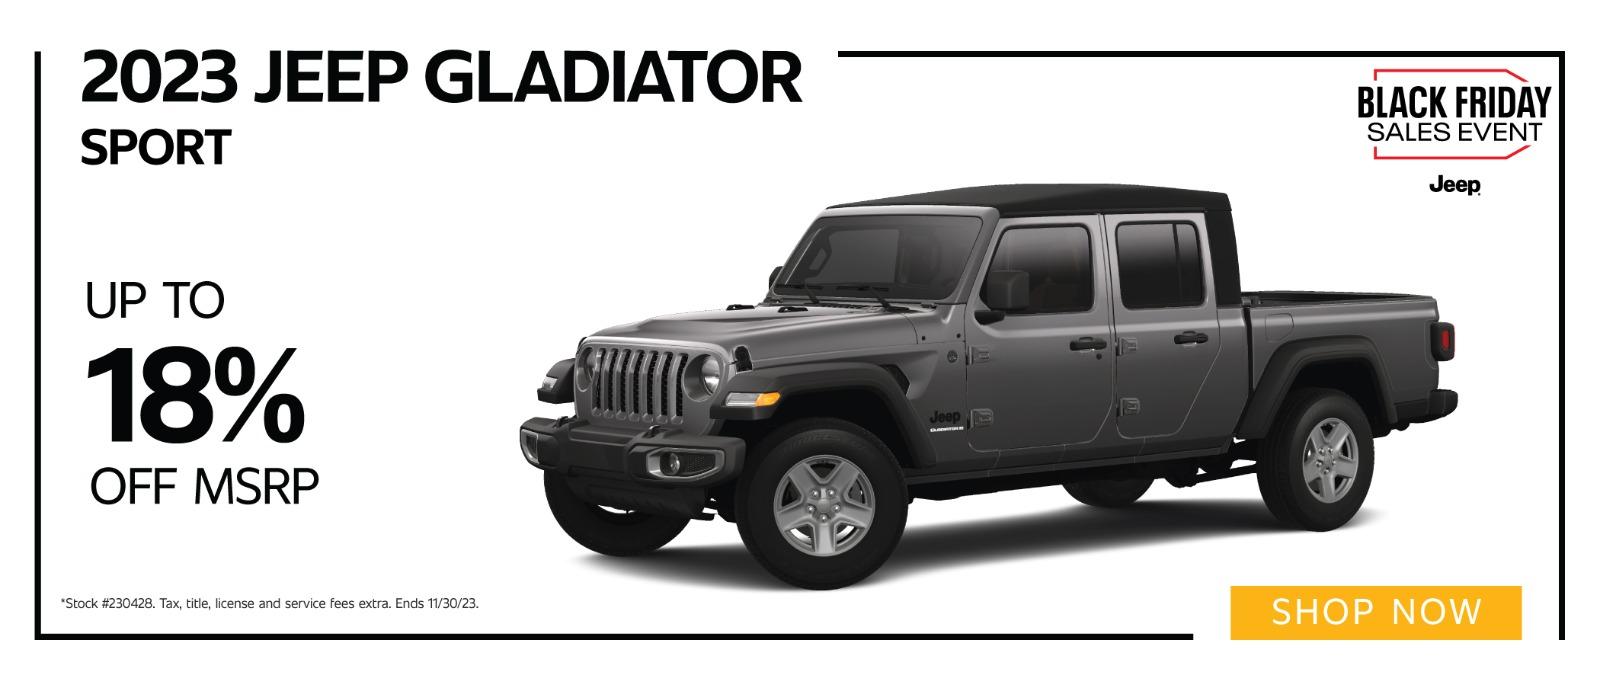 2023 Jeep Gladiator Sport up to 18%off MSRP